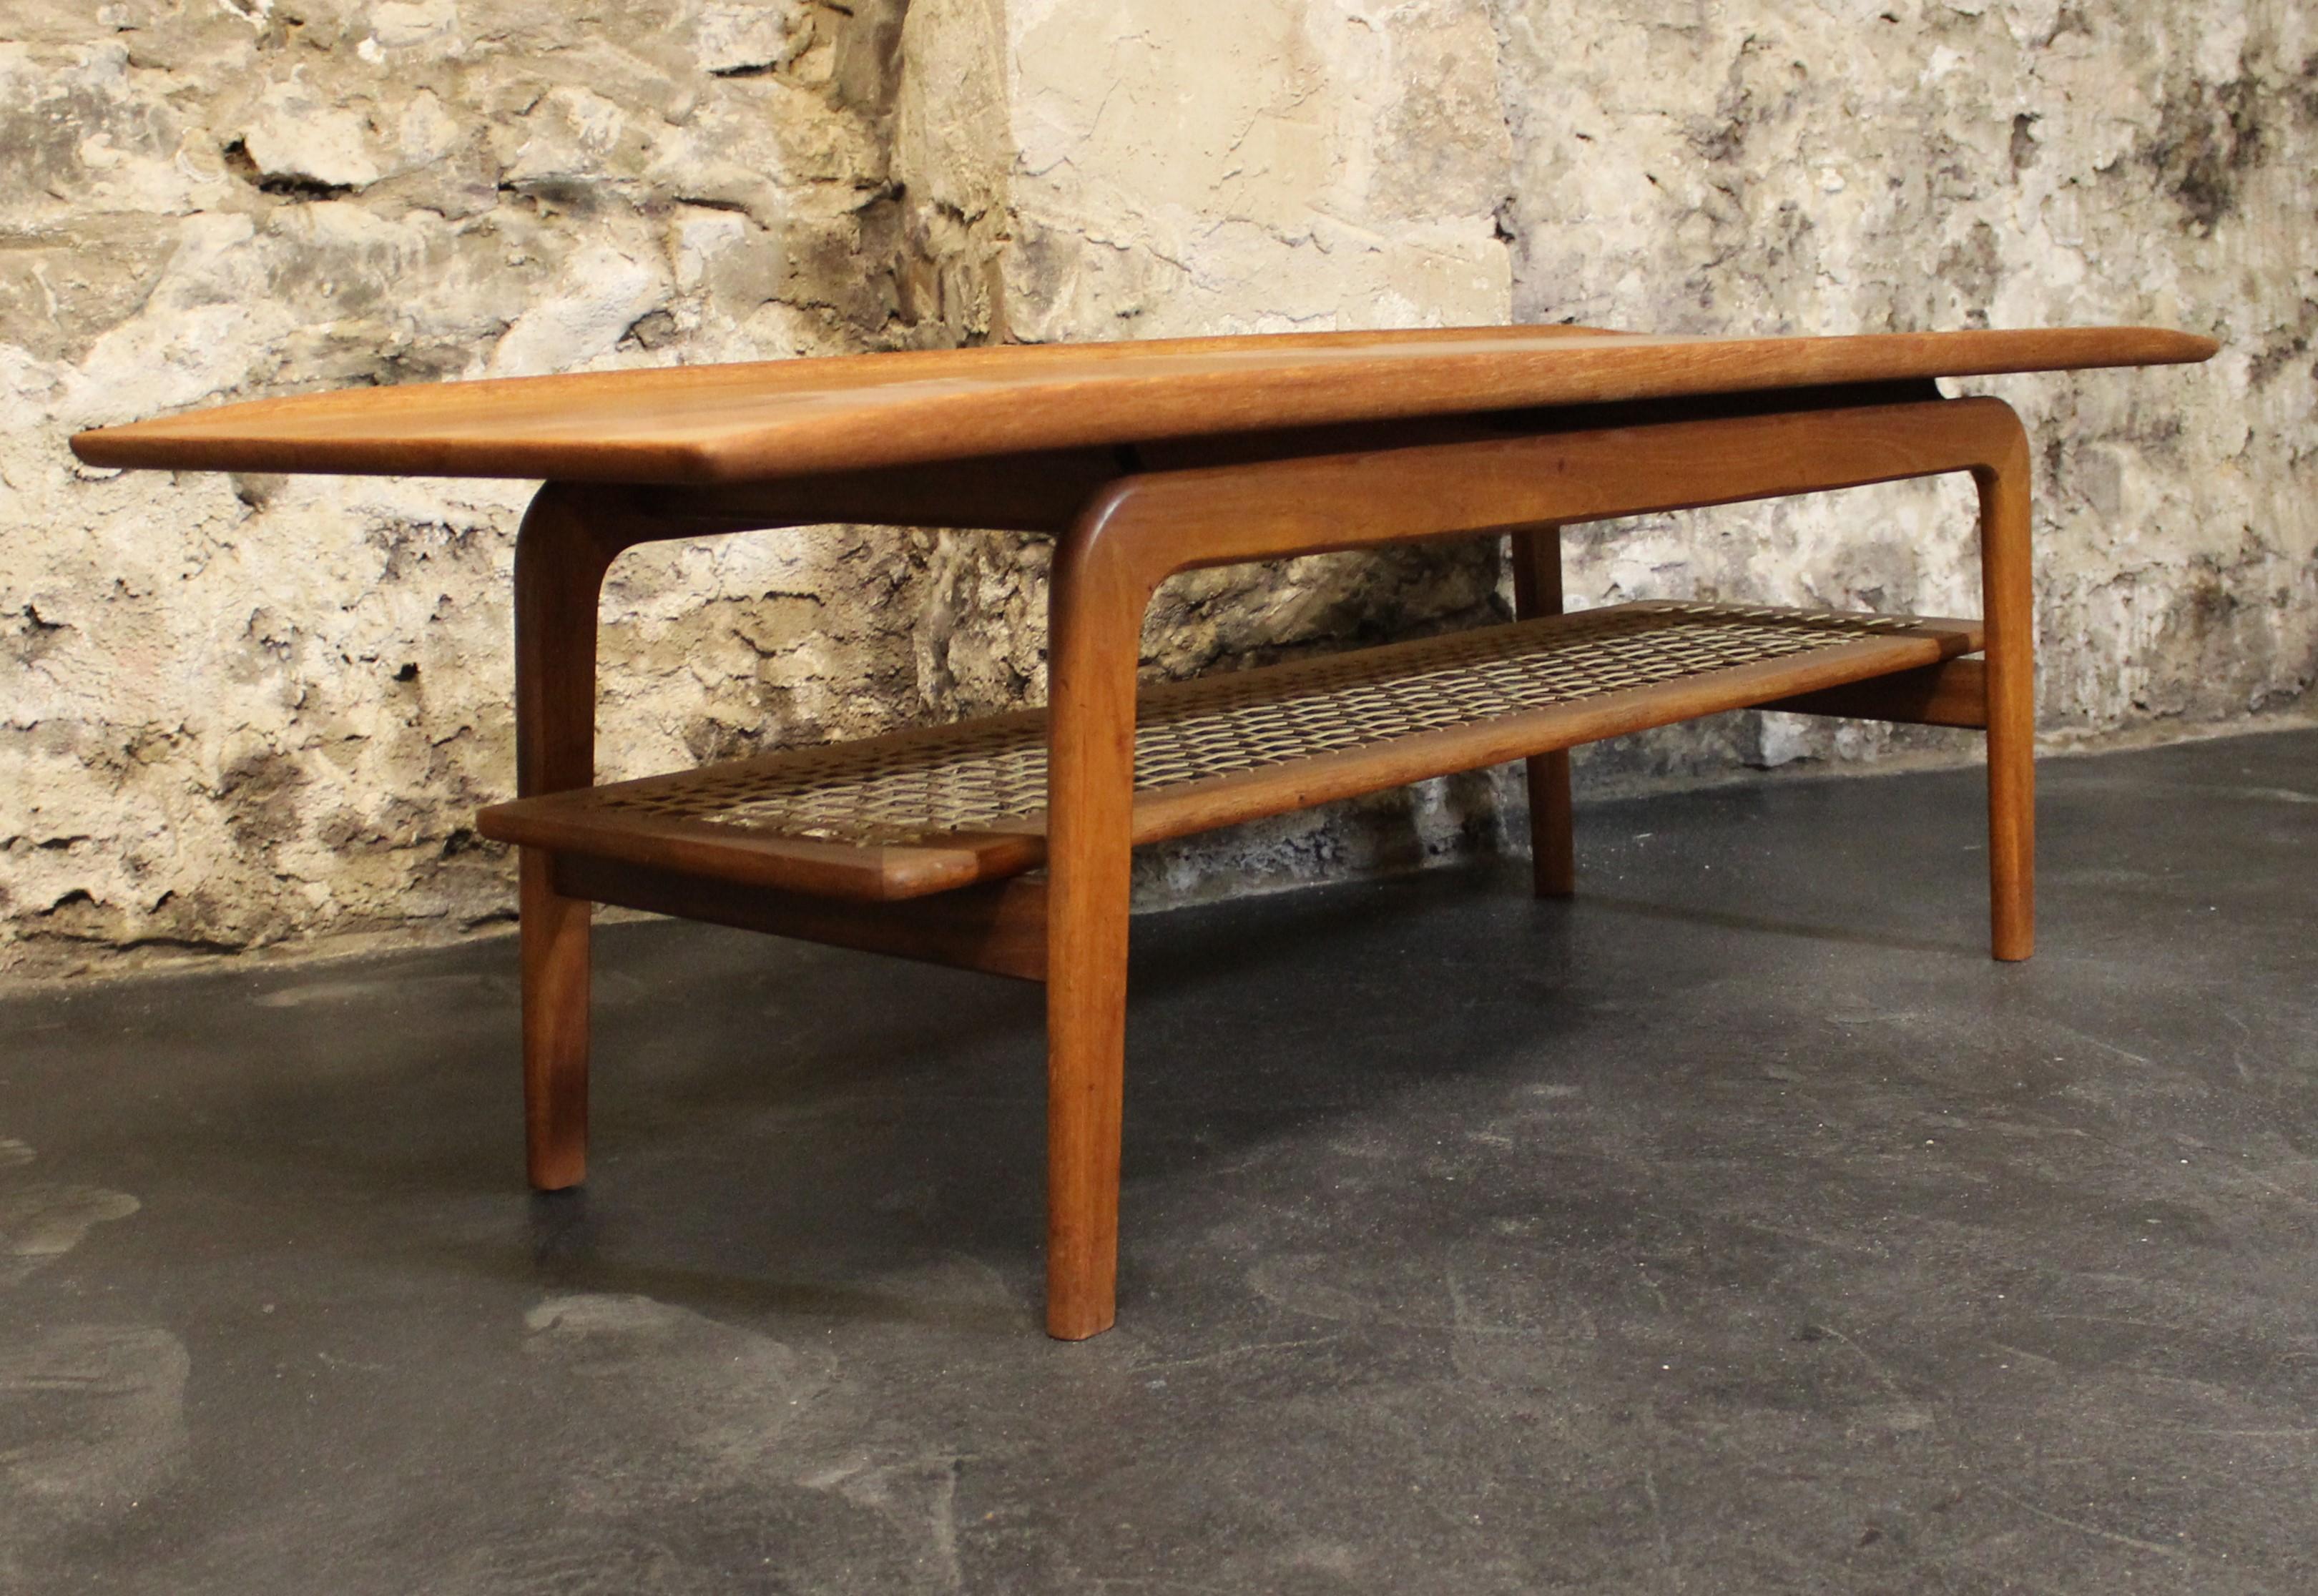 Stunning midcentury Danish teak coffee table with magazine rack designed by Arne Hovmand Olsen.

Superb raised edges and top designed to appear to be floating being raised from the frame with metal supports. Stunning curved frame and looks